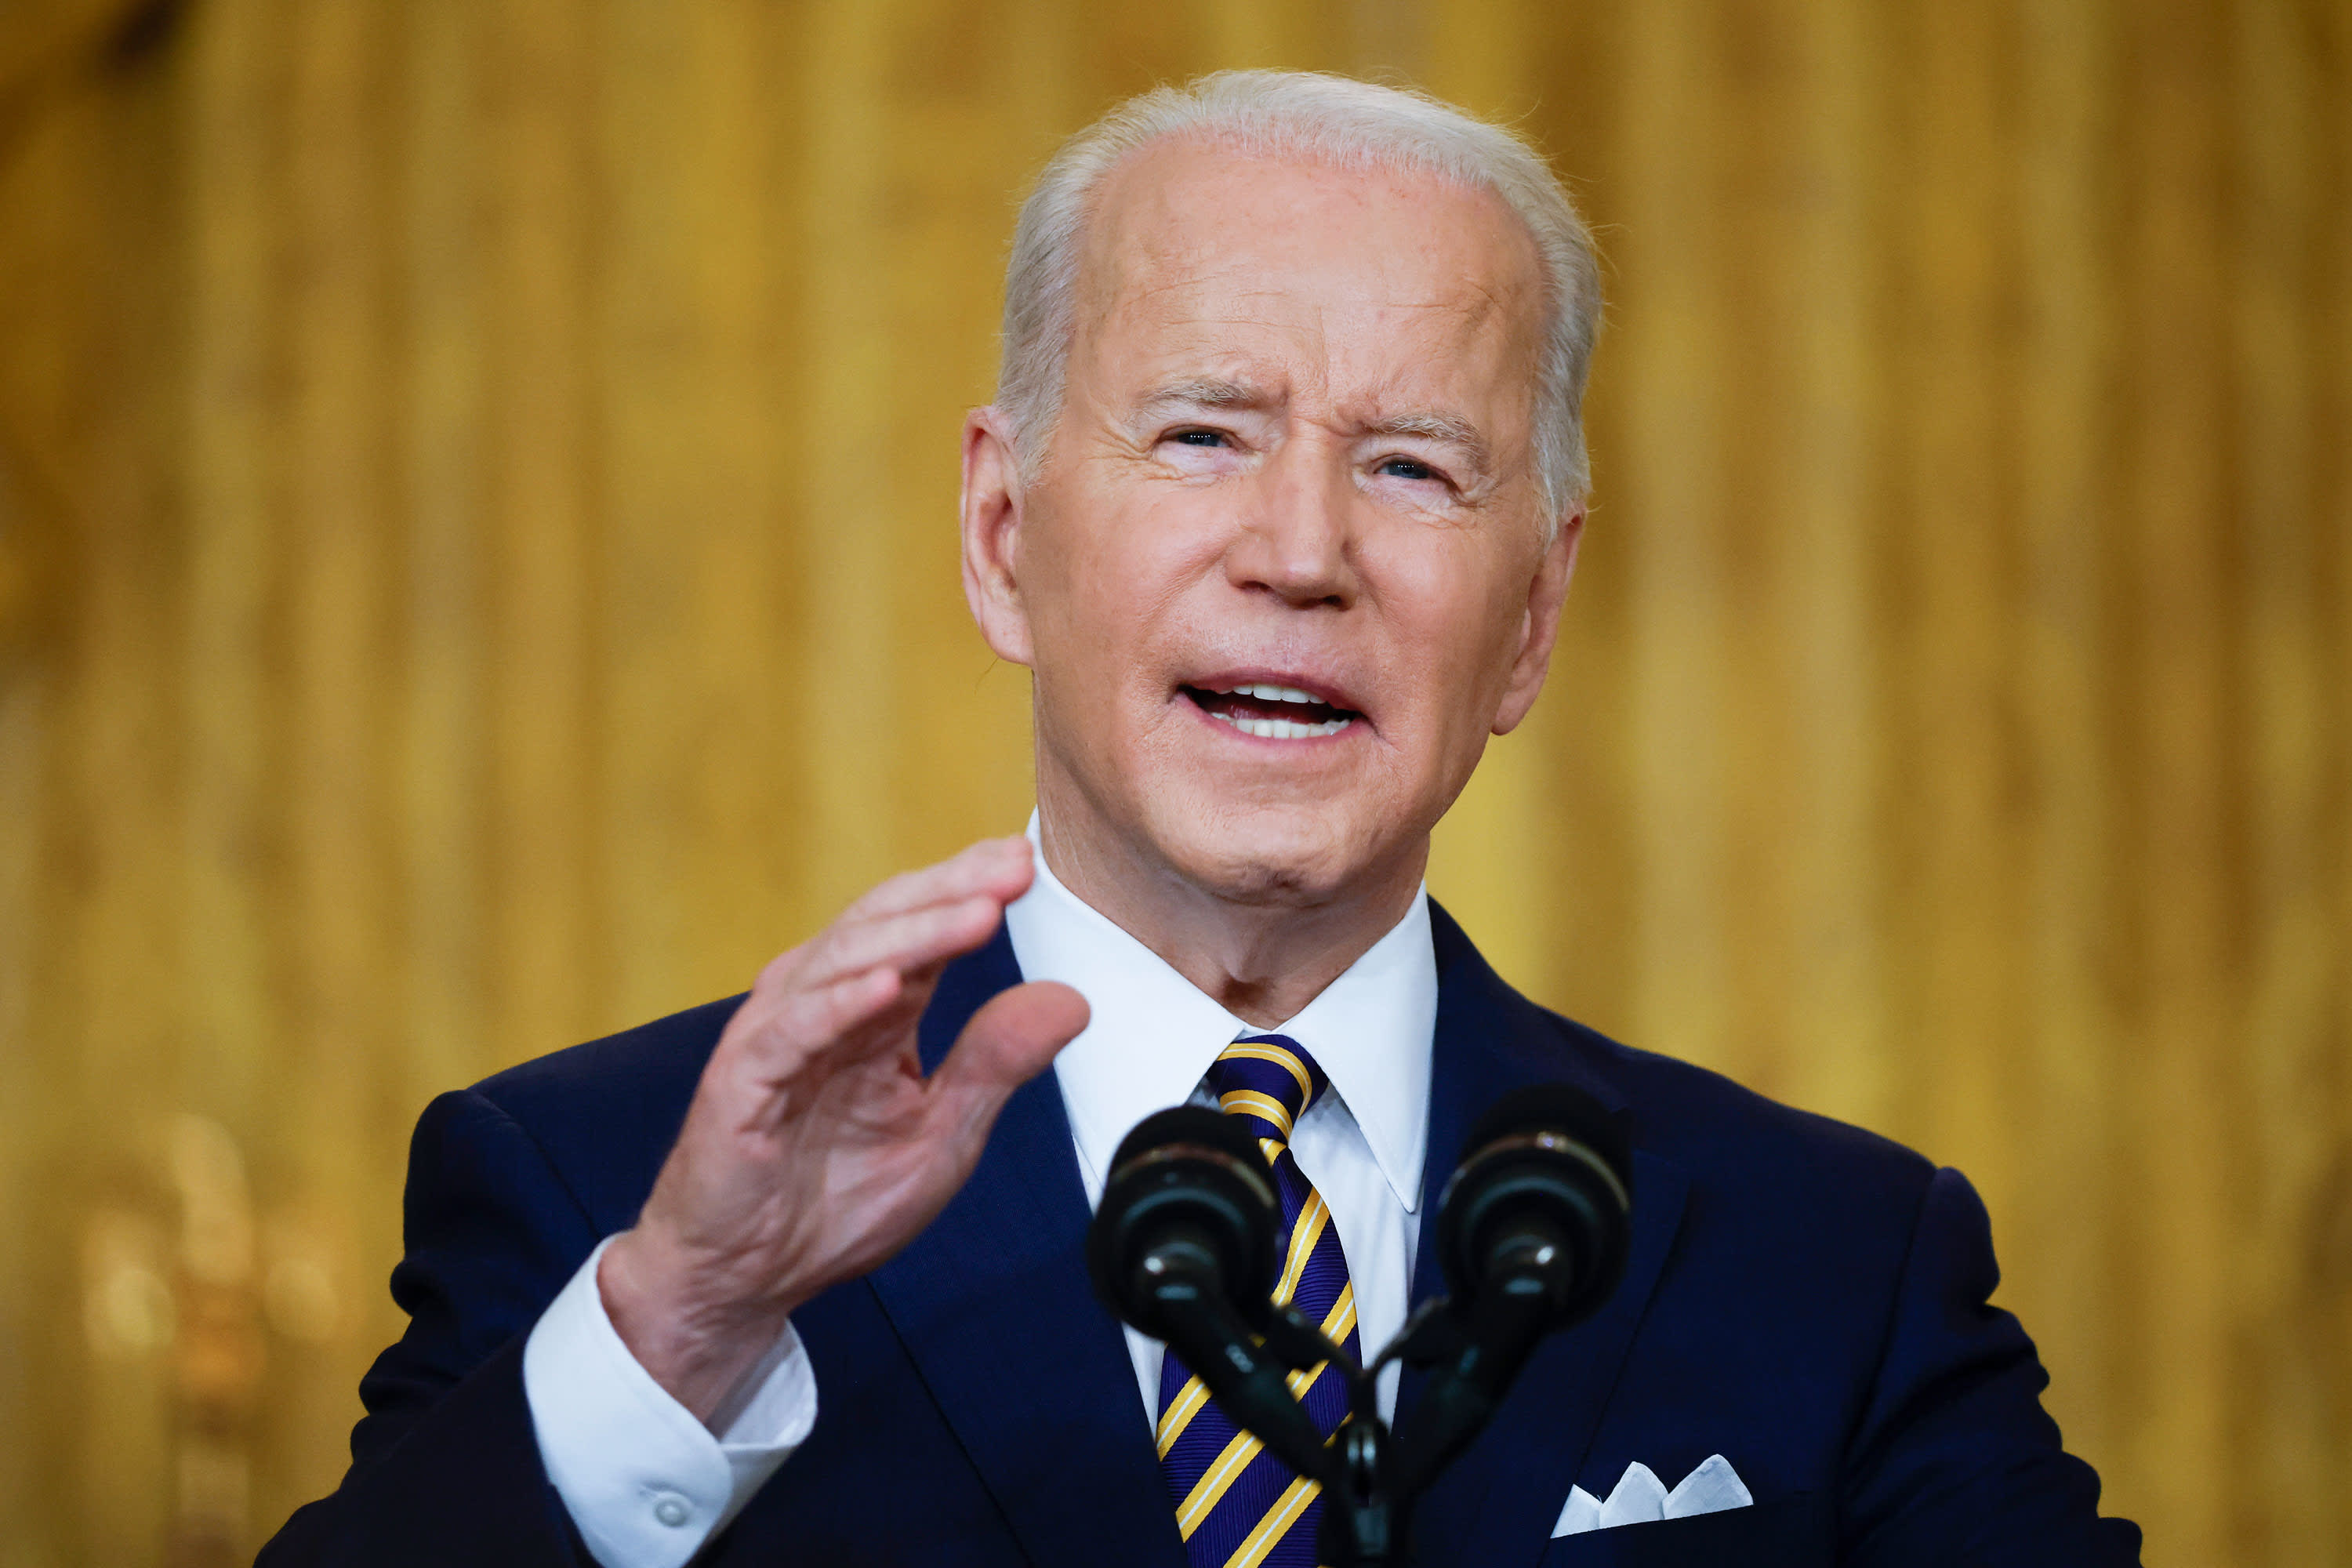 Biden defends his first year record as agenda stalls: ‘I didn’t overpromise’